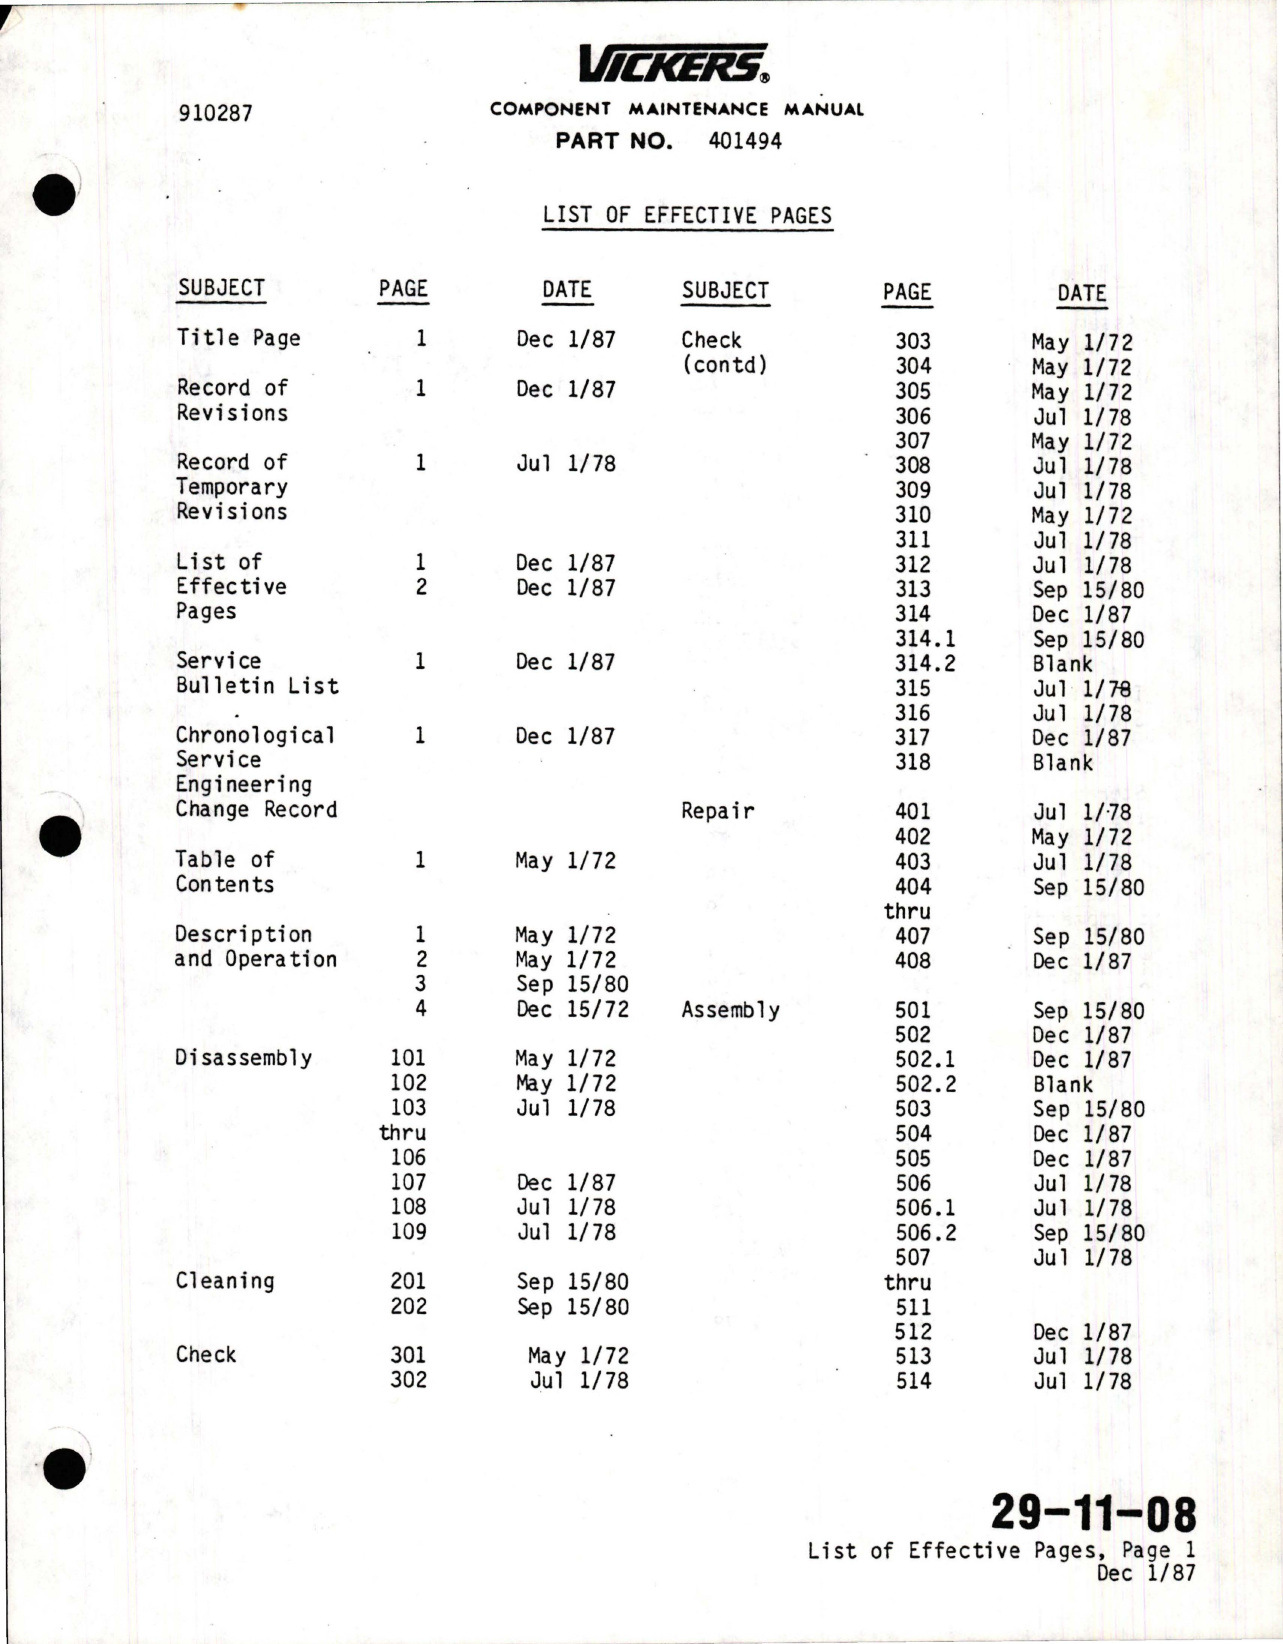 Sample page 7 from AirCorps Library document: Maintenance Manual with Illustrated Parts List for Variable Displacement Hydraulic Motorpump Assembly - Model MPEV3-022-14C, MPEV3-022-14D, and MPEV3-022-14E